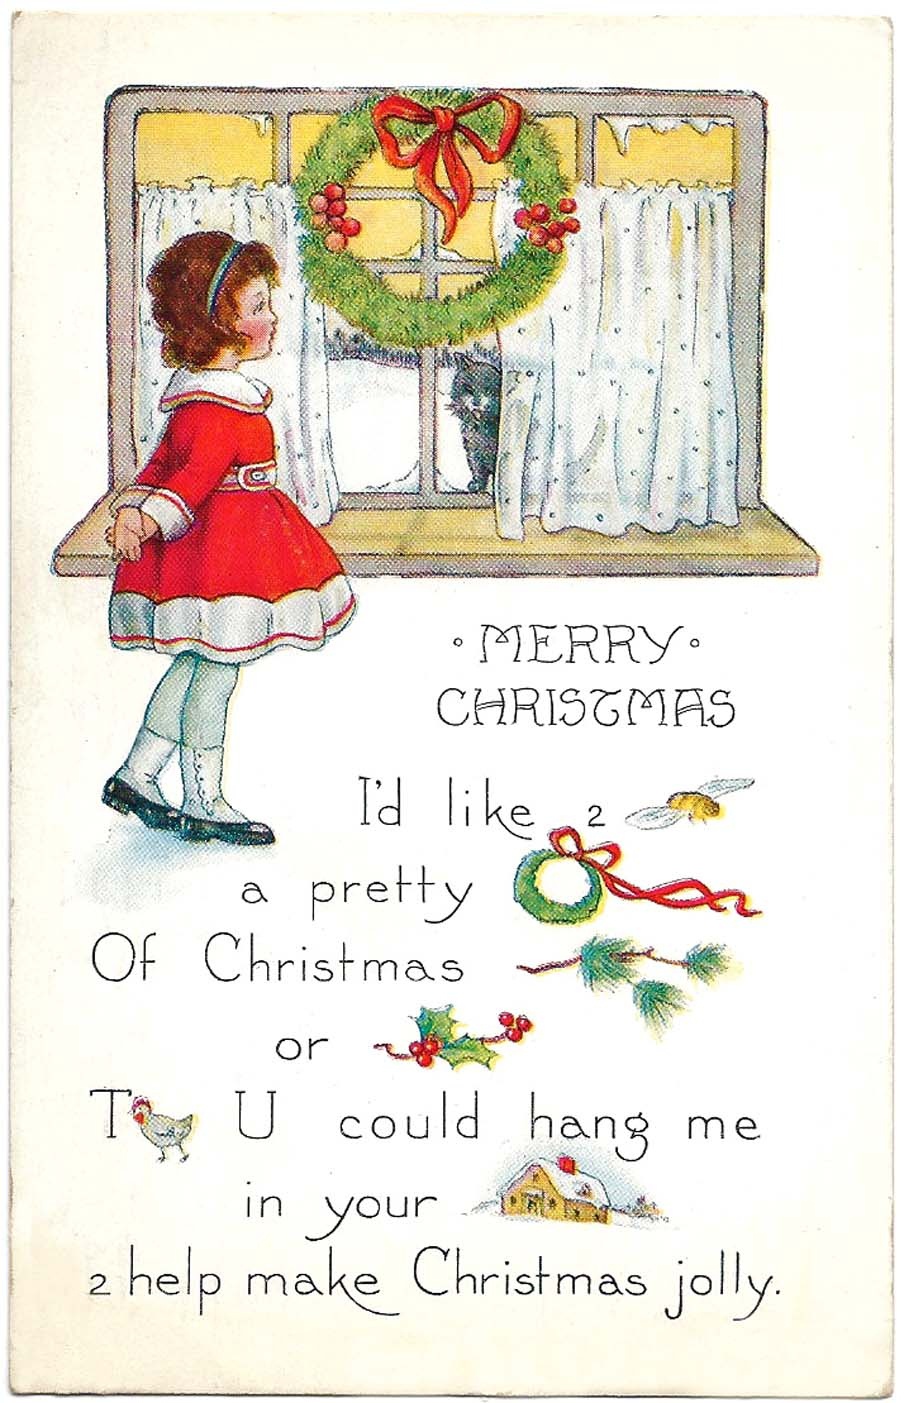 Free Printable Christmas Cards - From Antique Victorian To Modern - Free Printable Vintage Christmas Images